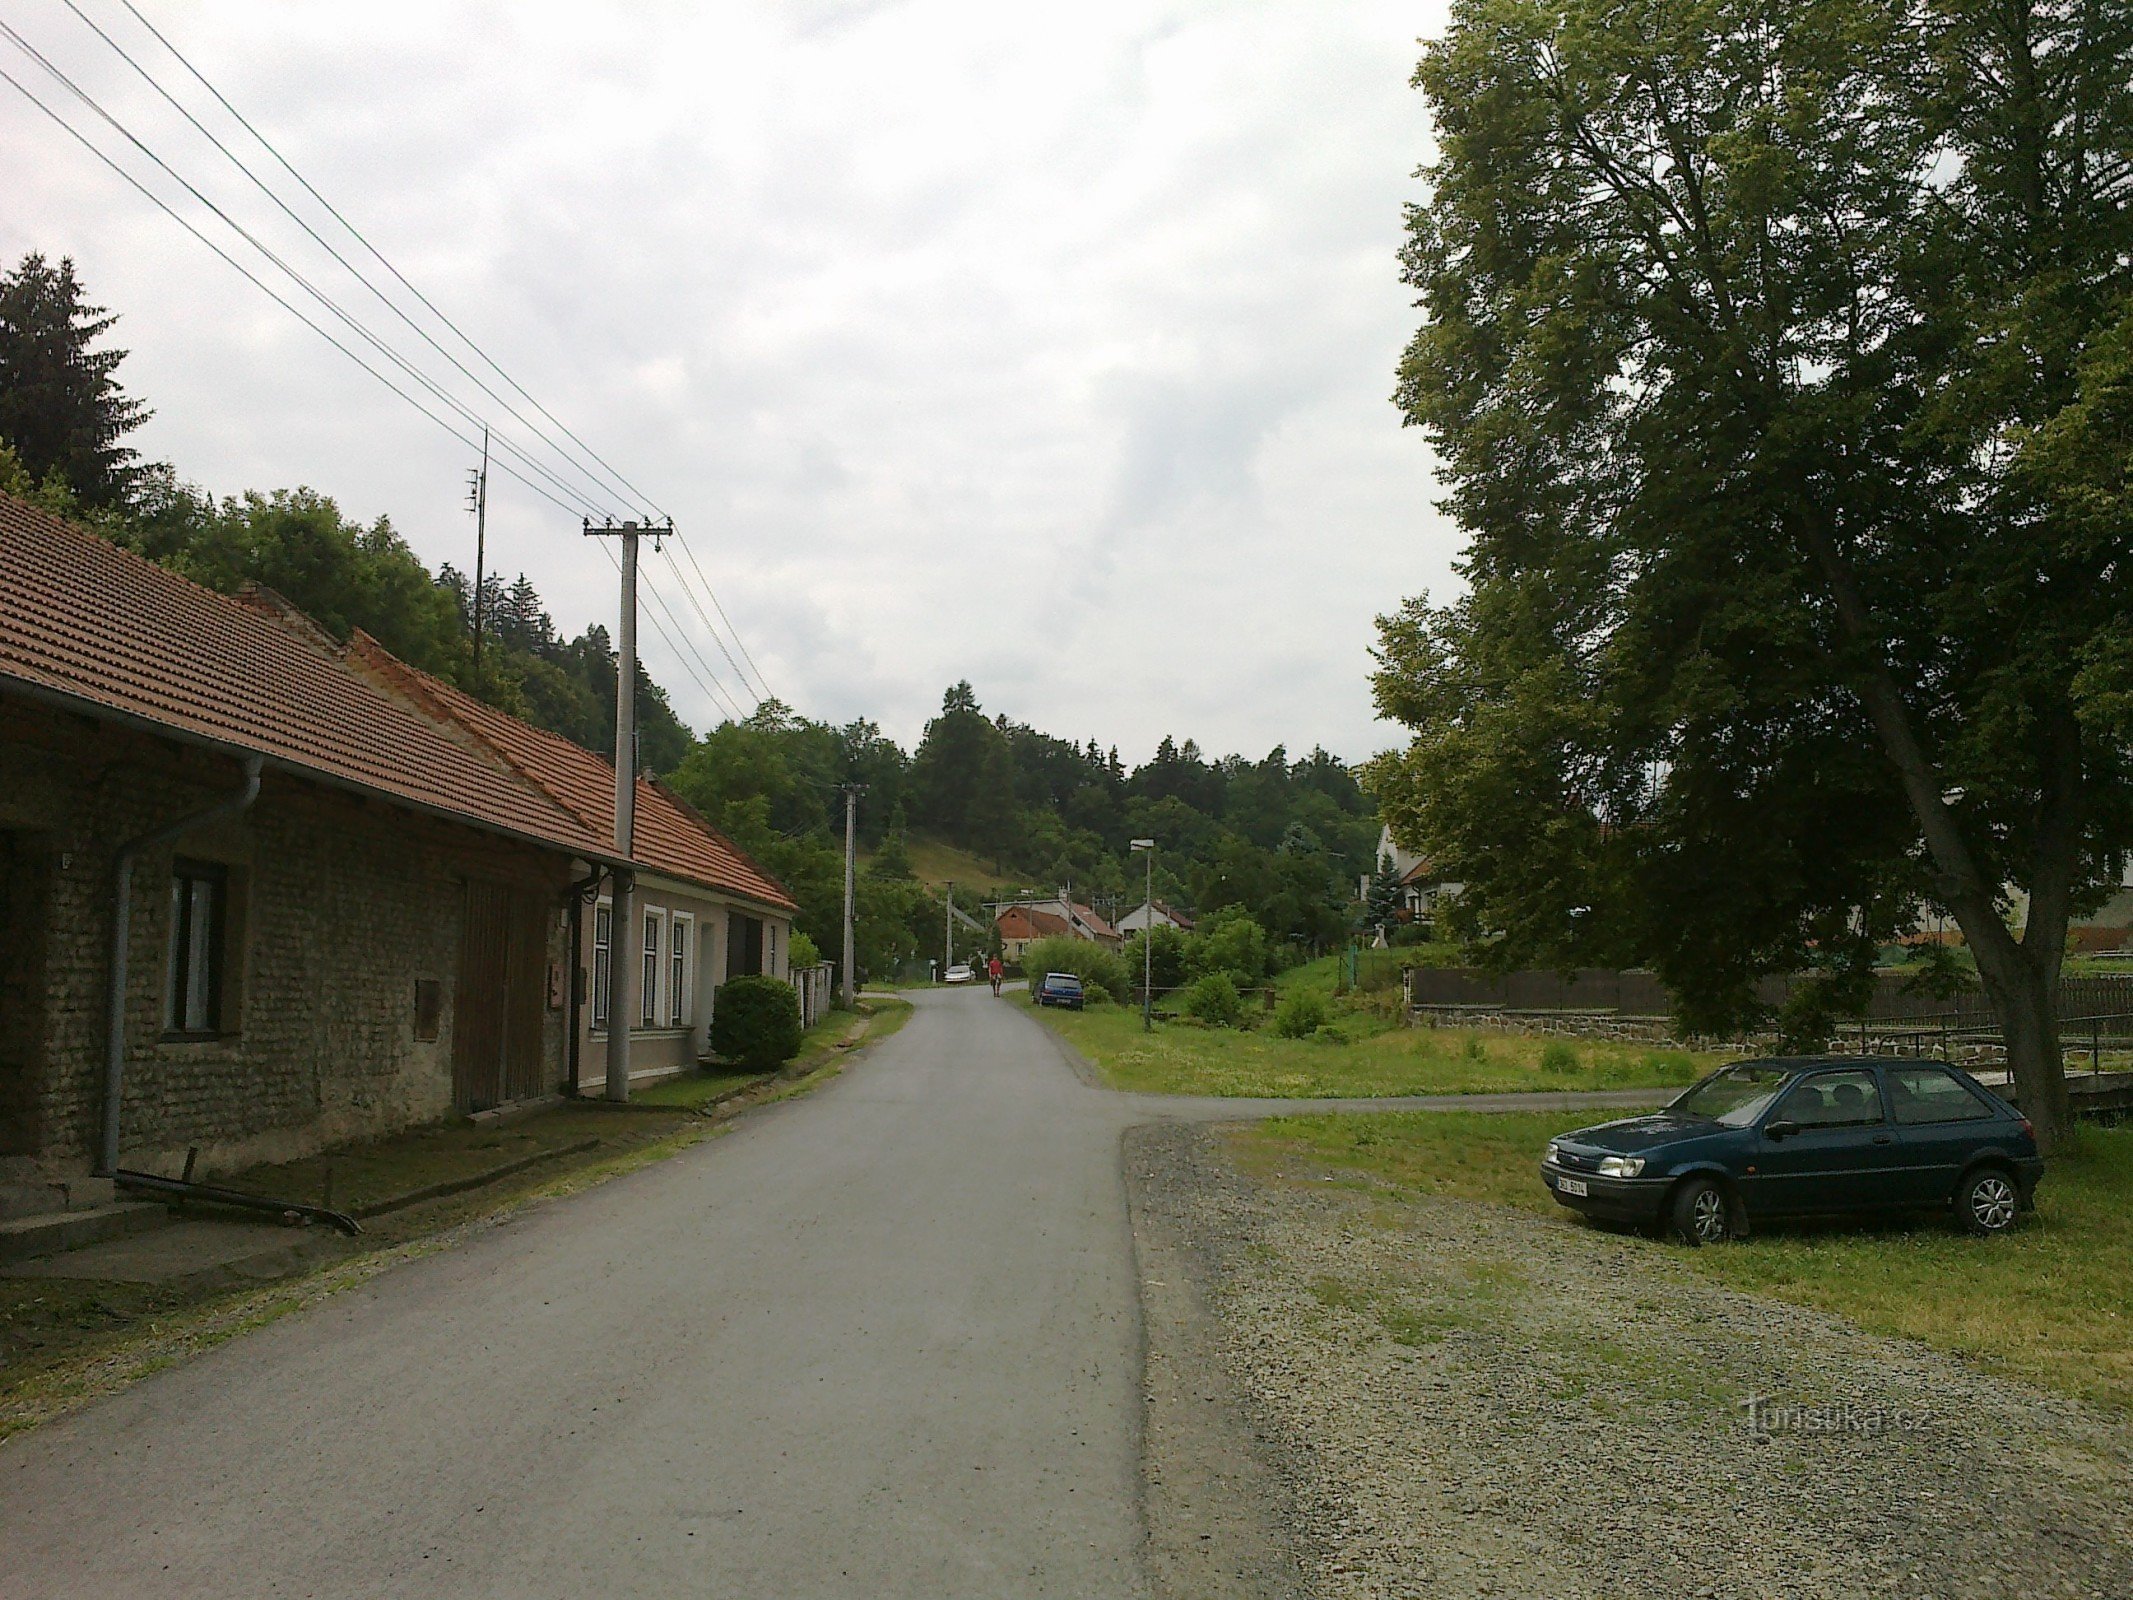 View up through the village